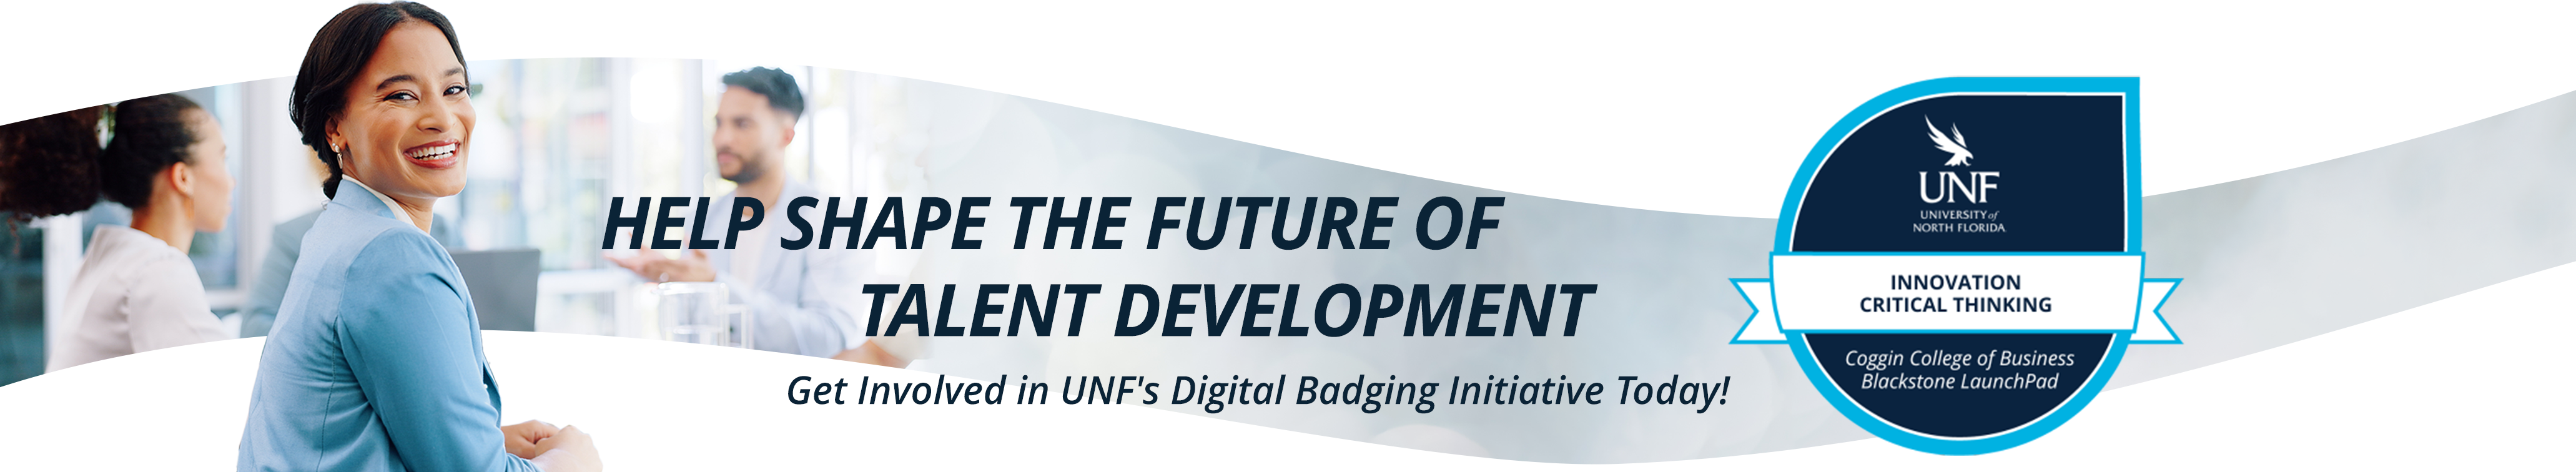 Help Shape the Future of Workforce Development Get Involved in UNFs Digital Badging Initiative Today text on a decorative image